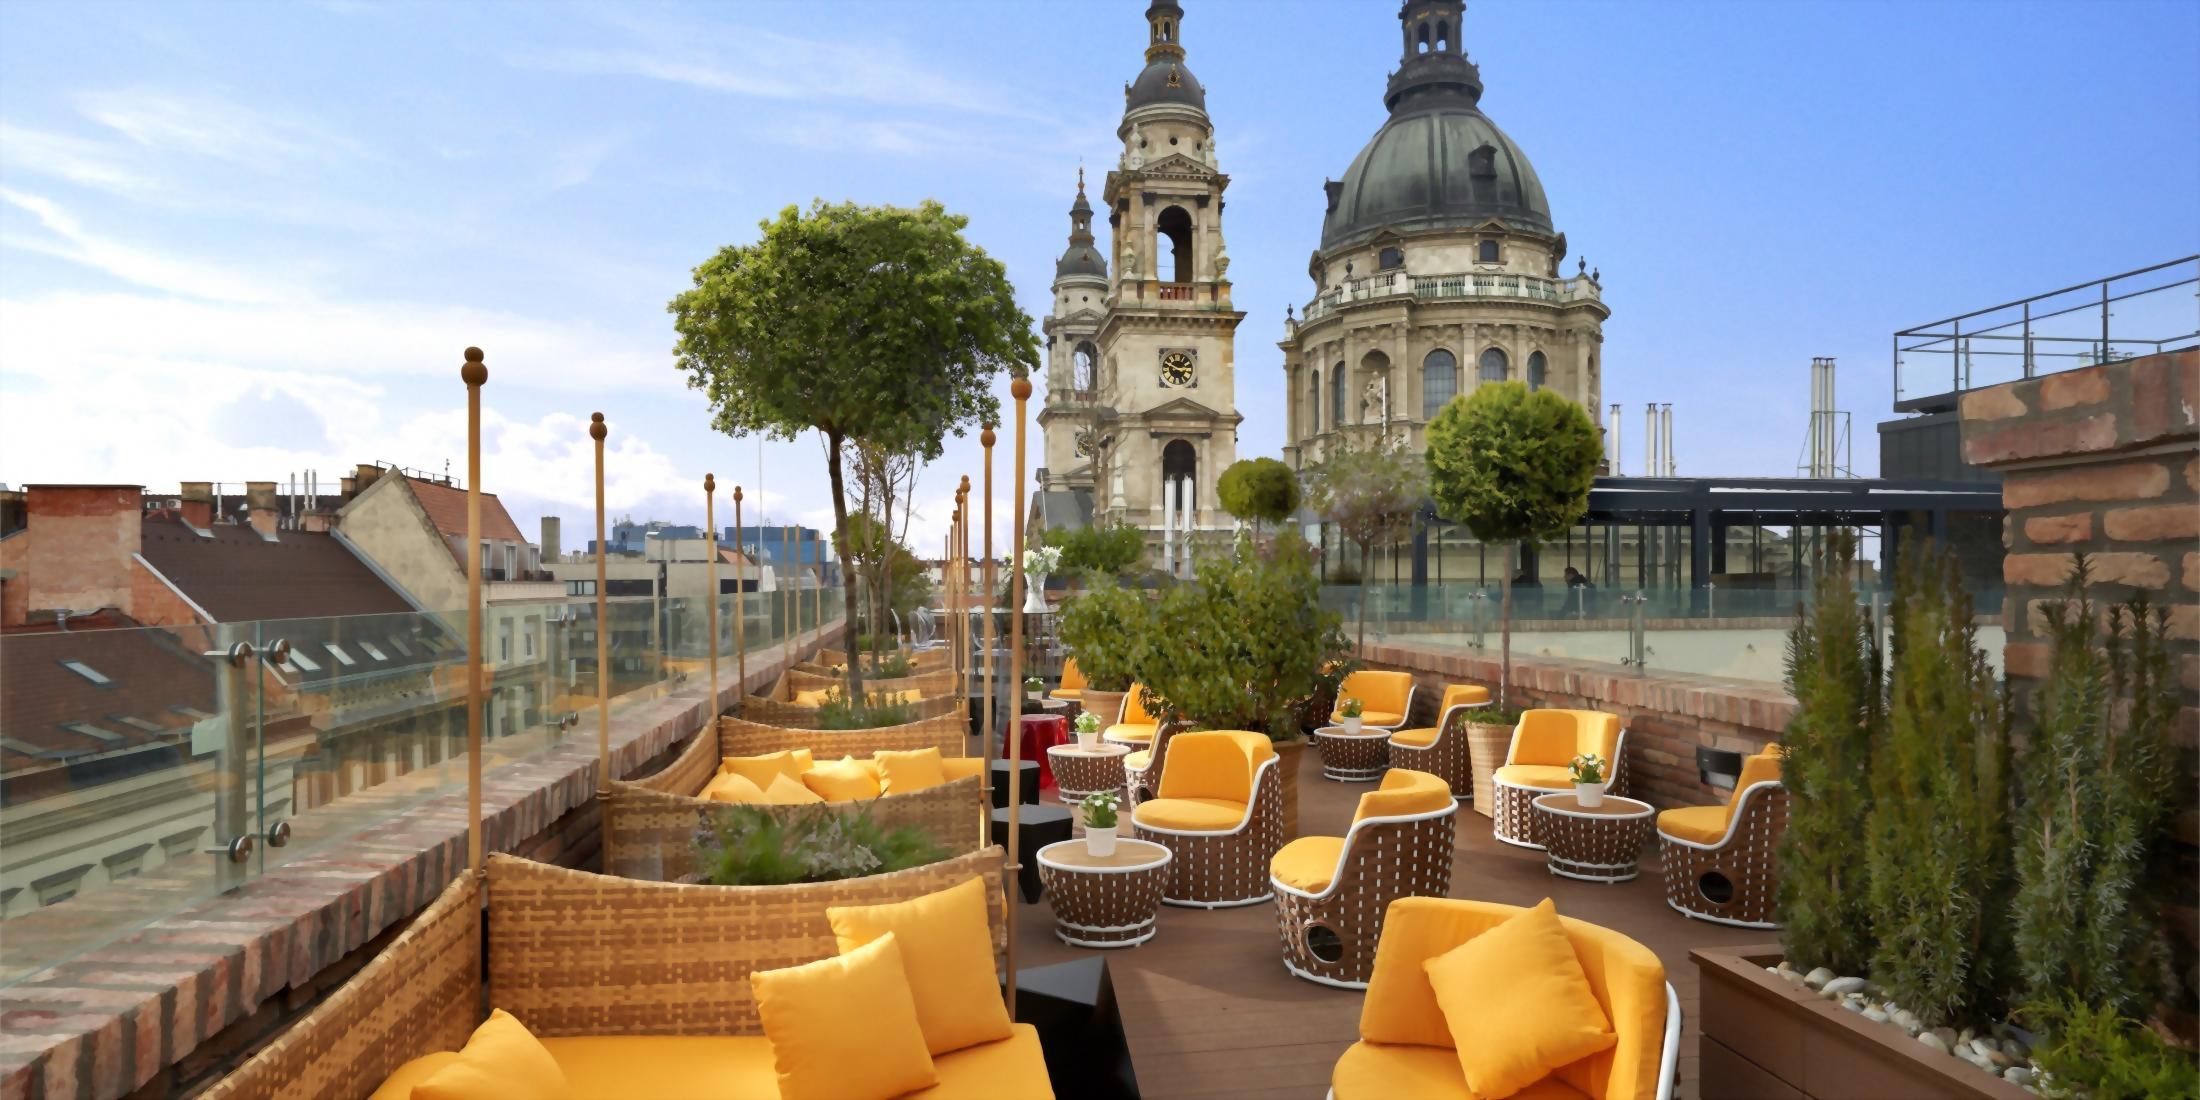 Located in the historic city center, Aria Hotel Budapest is situated beside the famous St. Stephen’s Basilica.